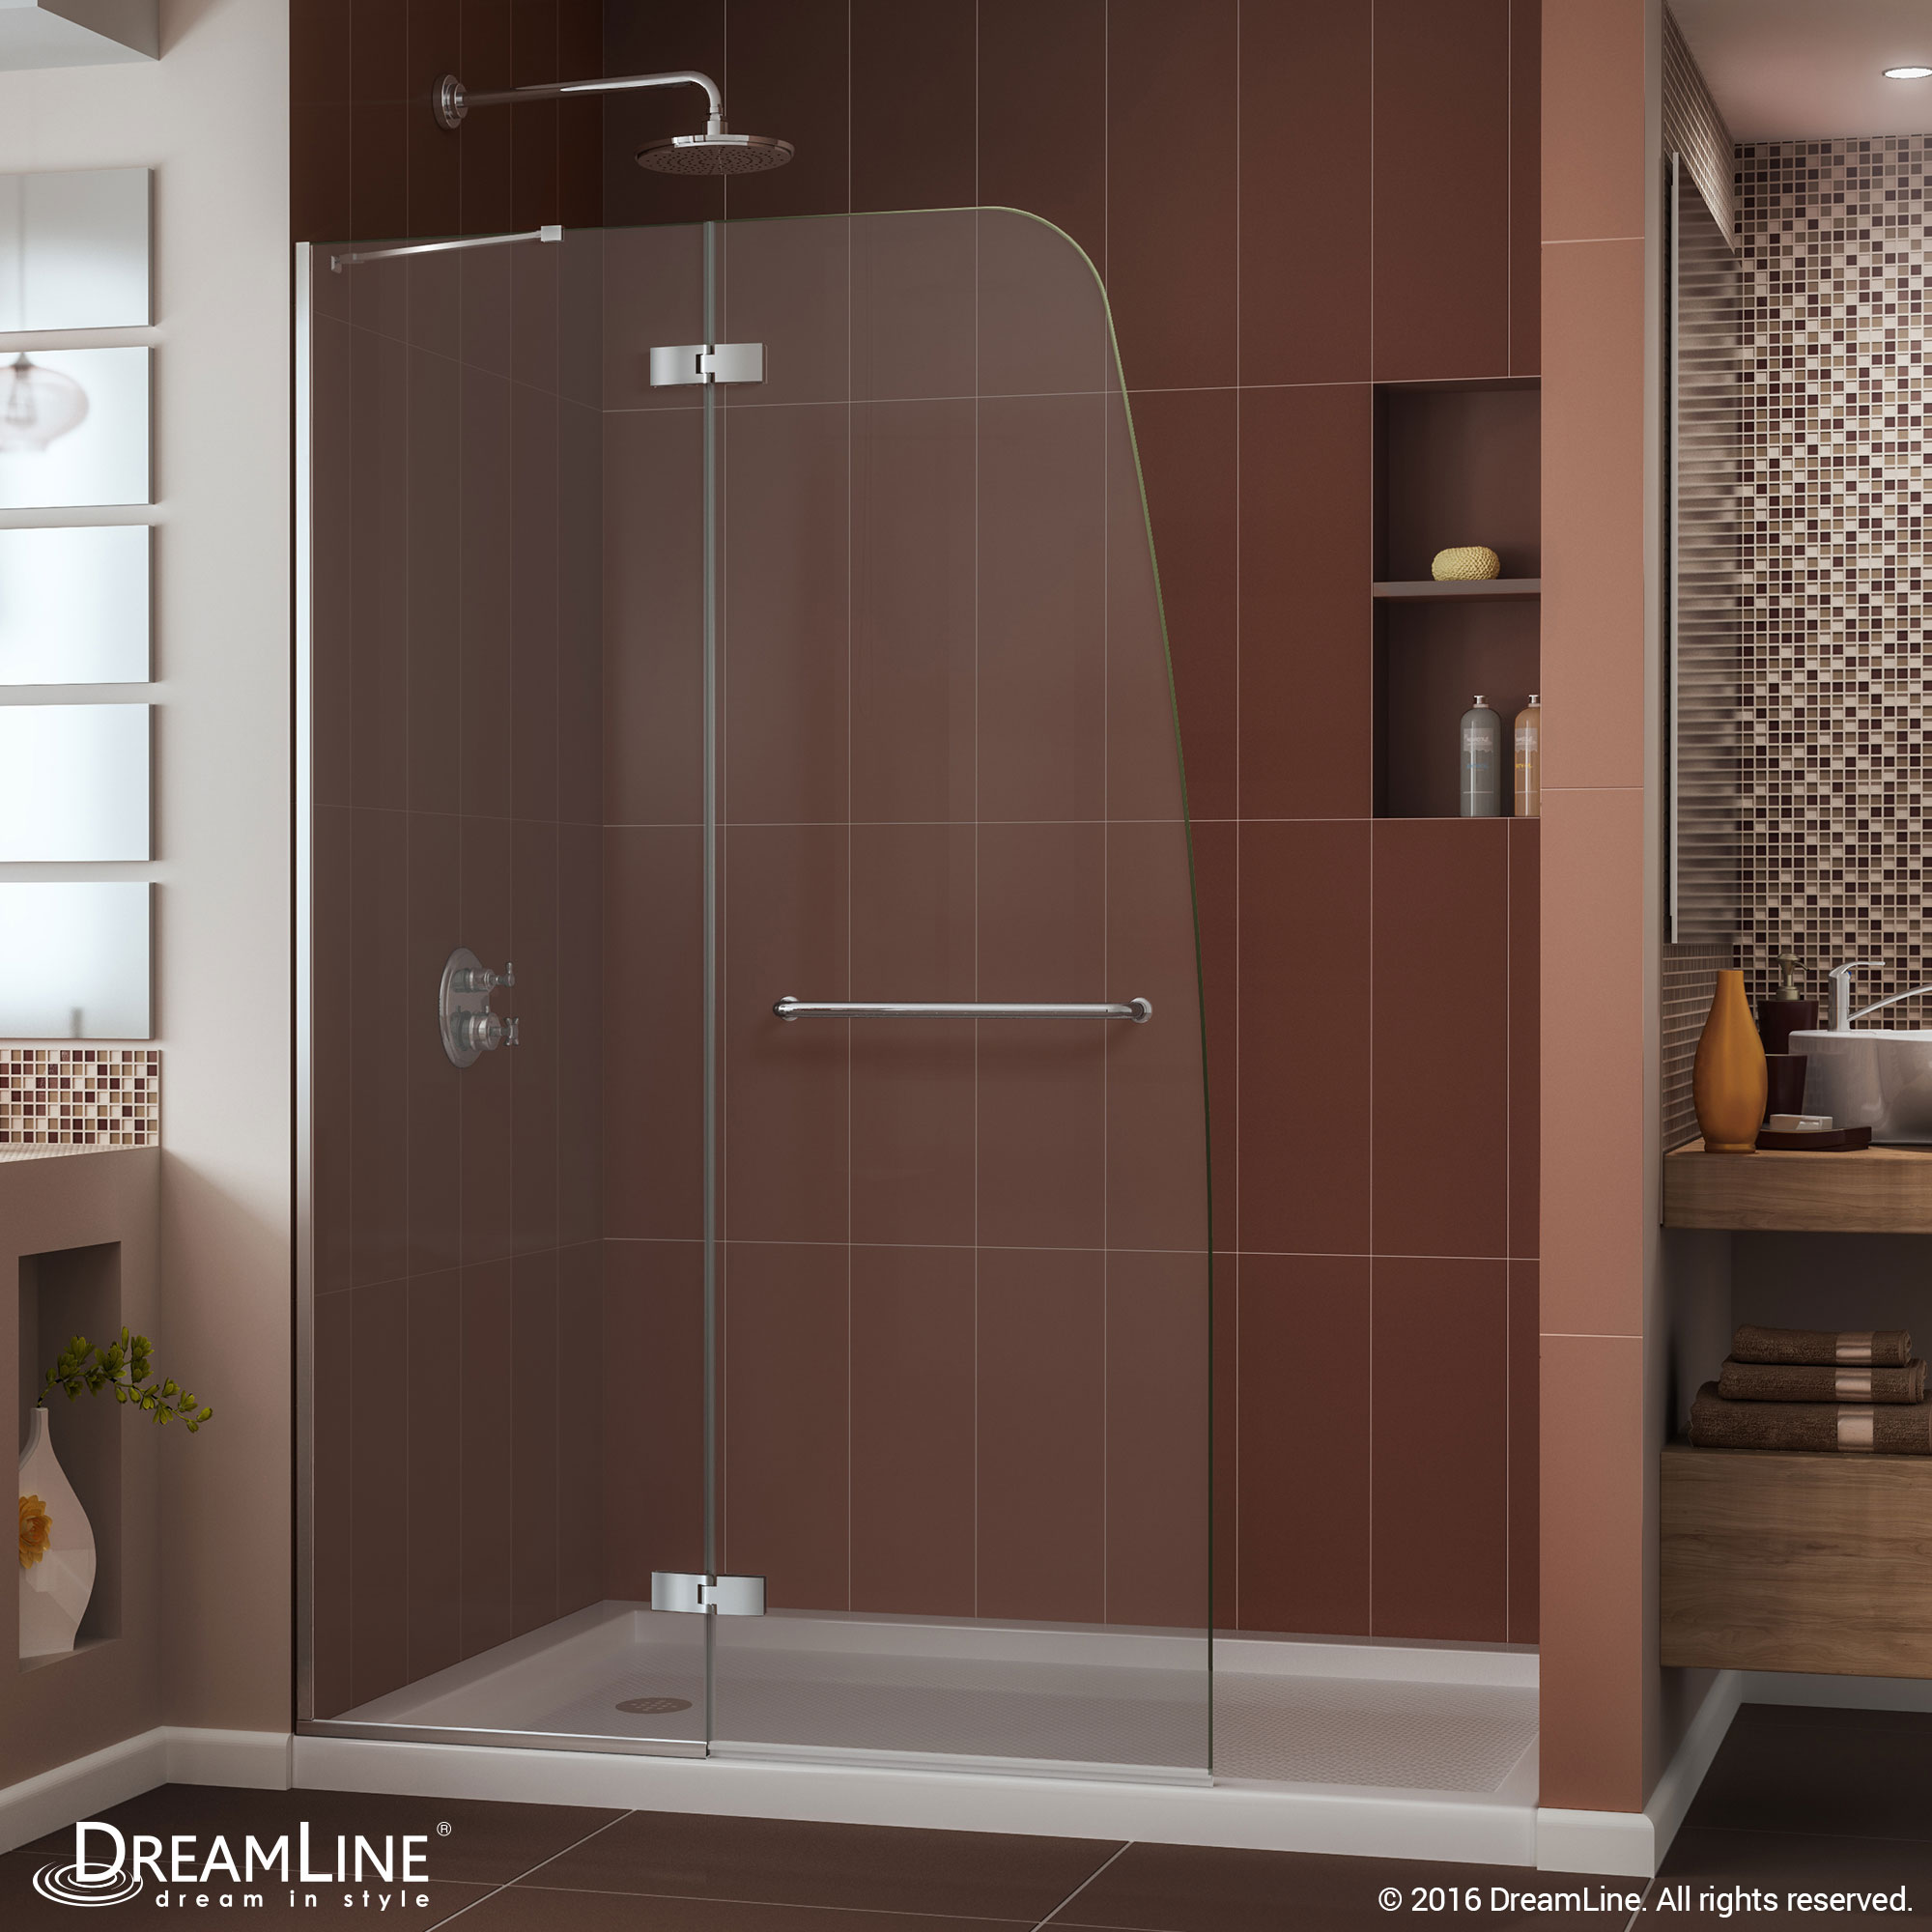 DreamLine Aqua Ultra 36 in. D x 48 in. W x 74 3/4 in. H Frameless Shower Door in Chrome and Center Drain Biscuit Base Kit